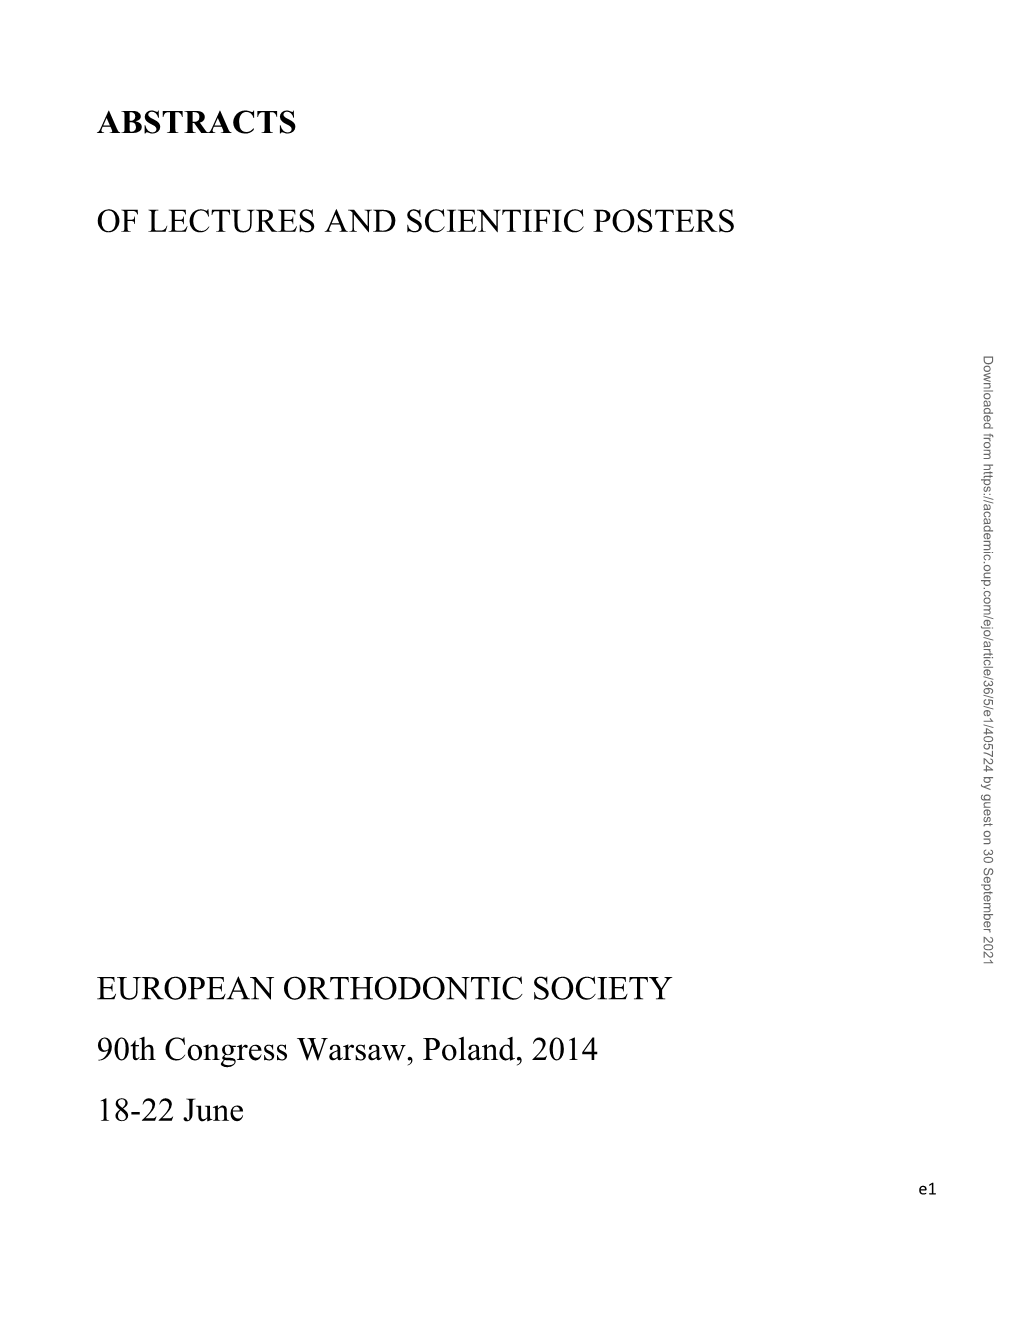 Abstracts of Lectures and Scientific Posters